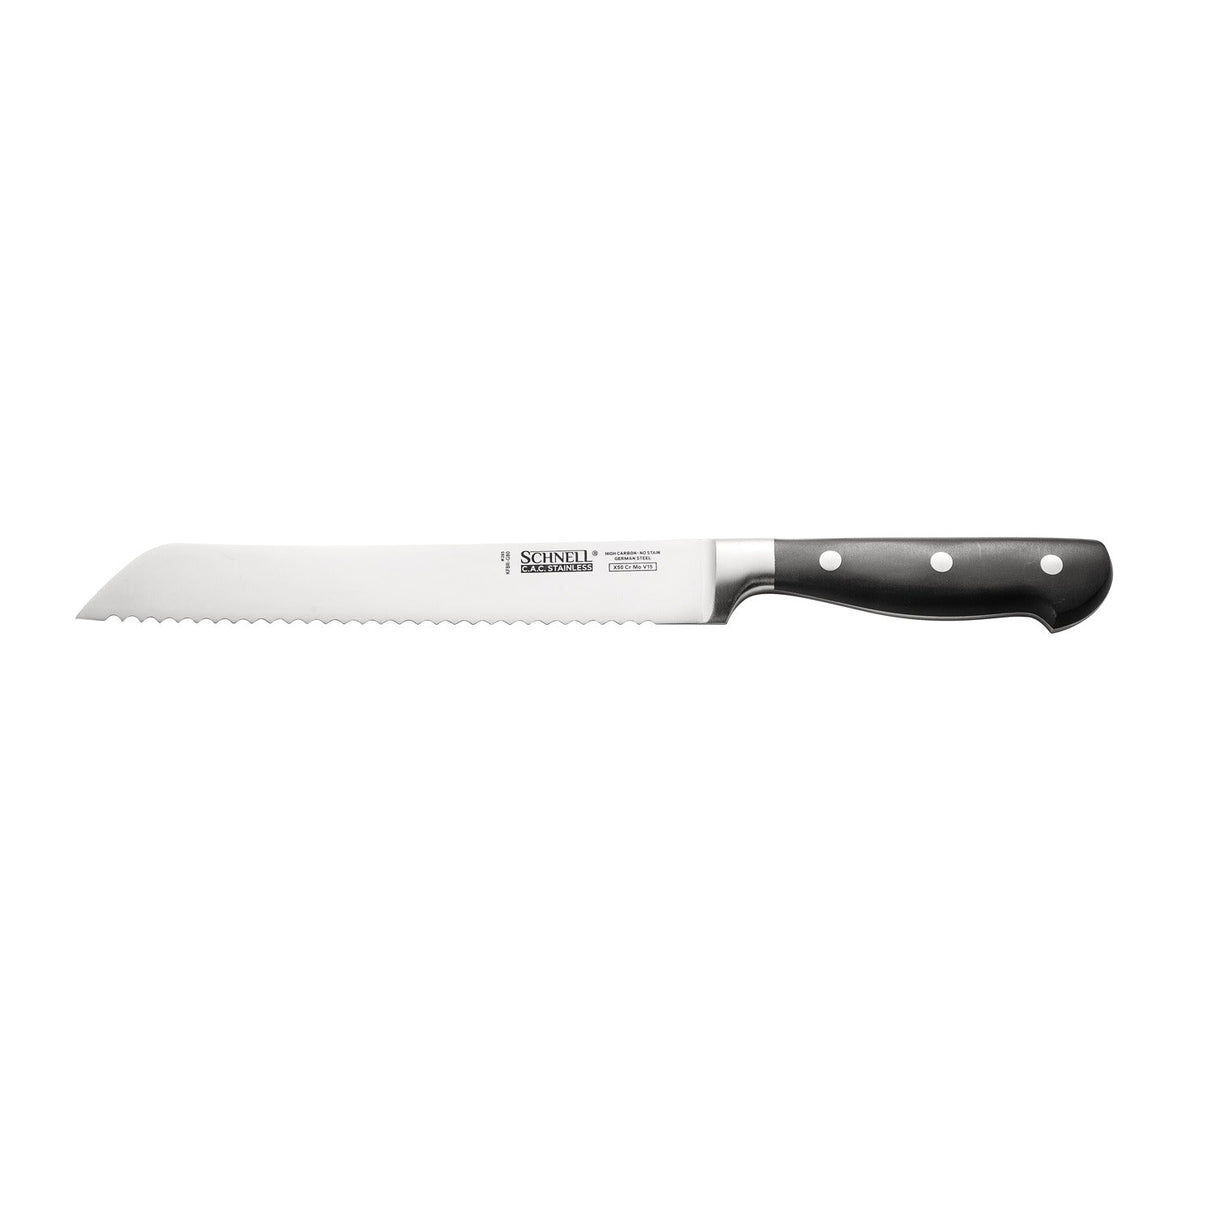 Schnell Bread Knife 8"